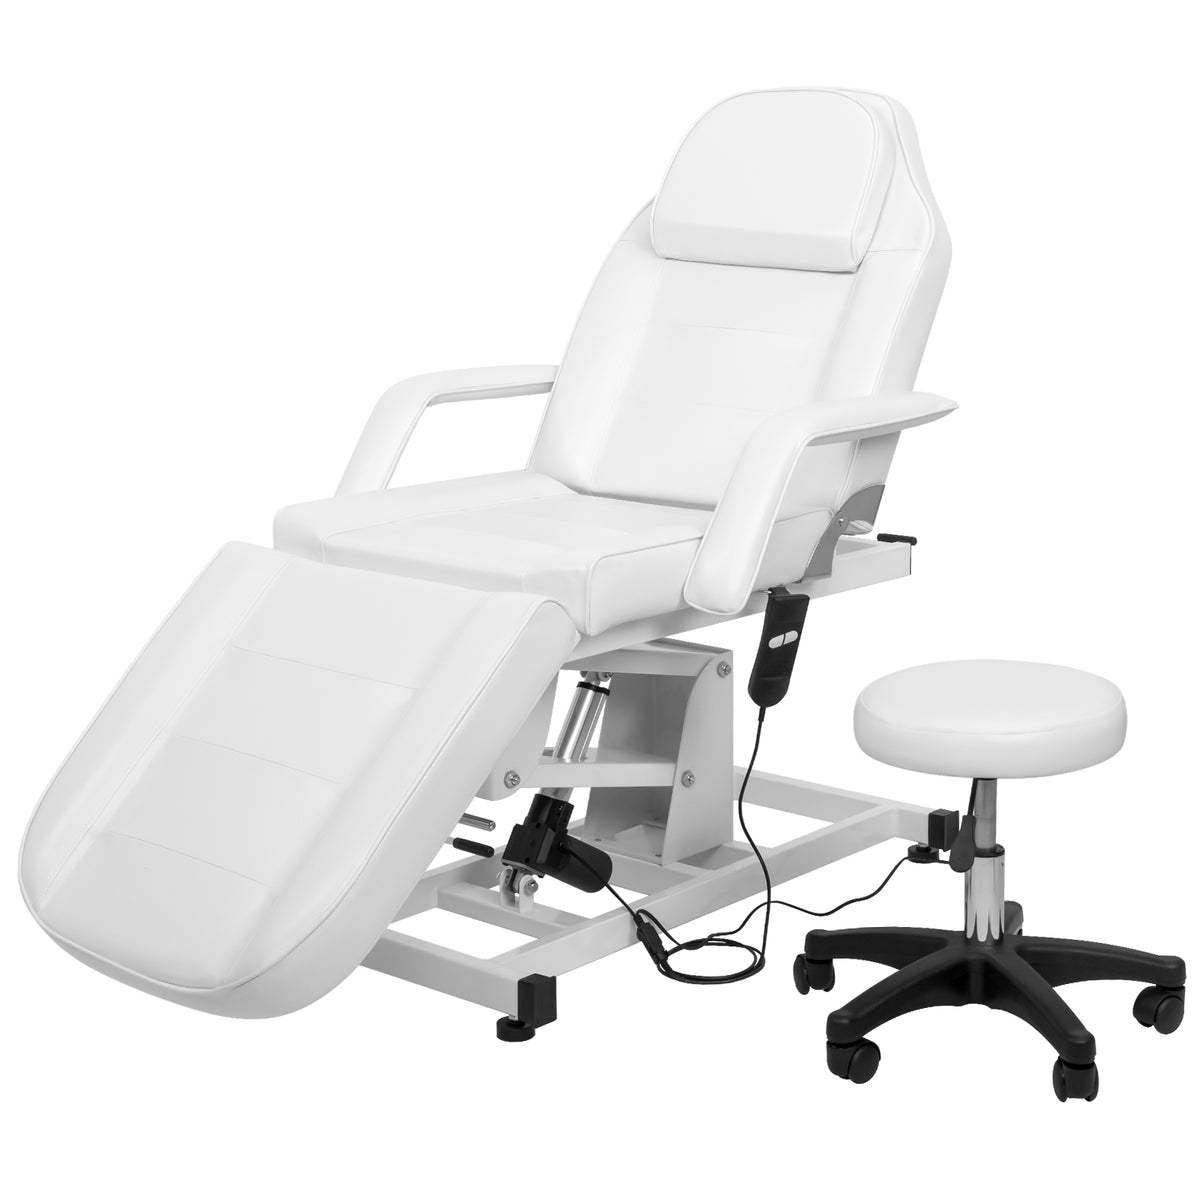 OmySalon 72in Electric Height Remote Adjustable Facial Massage Bed w/Hydraulic Rotating Stool